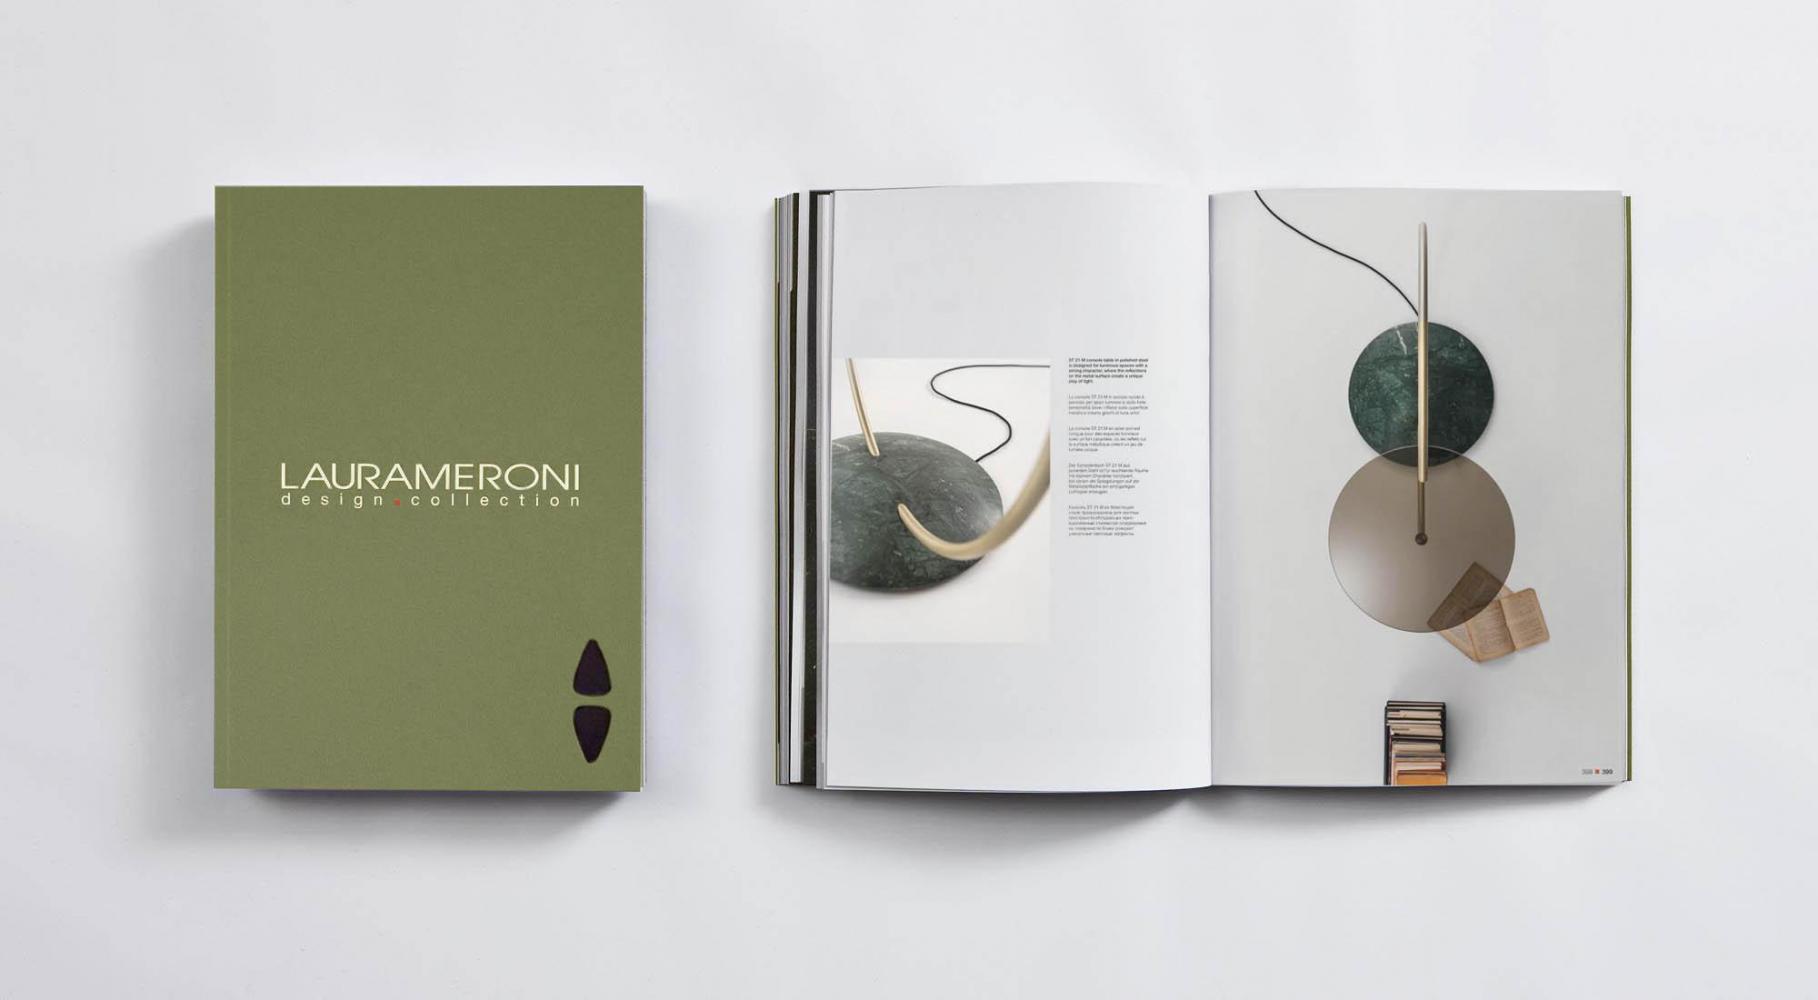 laurameroni luxury materials for customizable furniture and projects